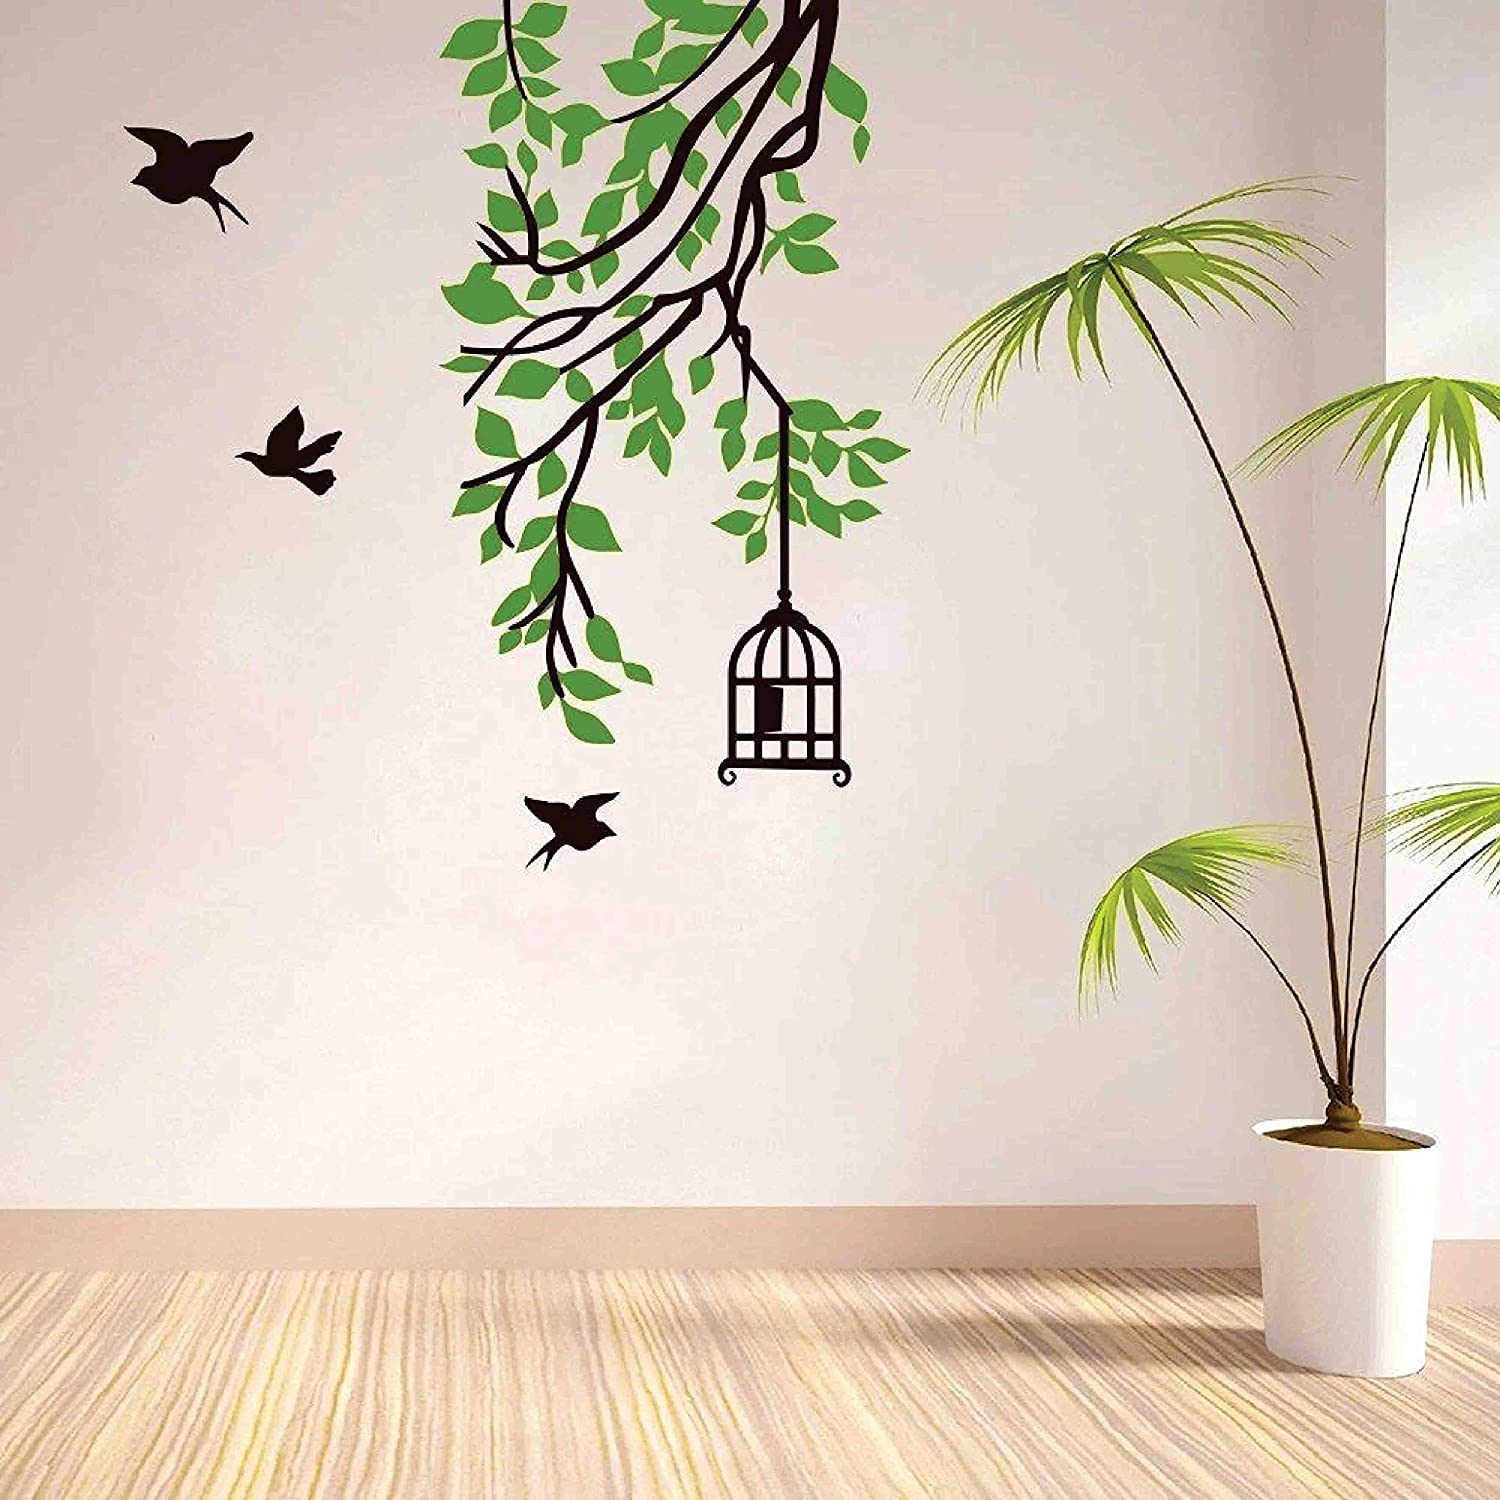 How Are Removable Wall Decals And Stickers Made?